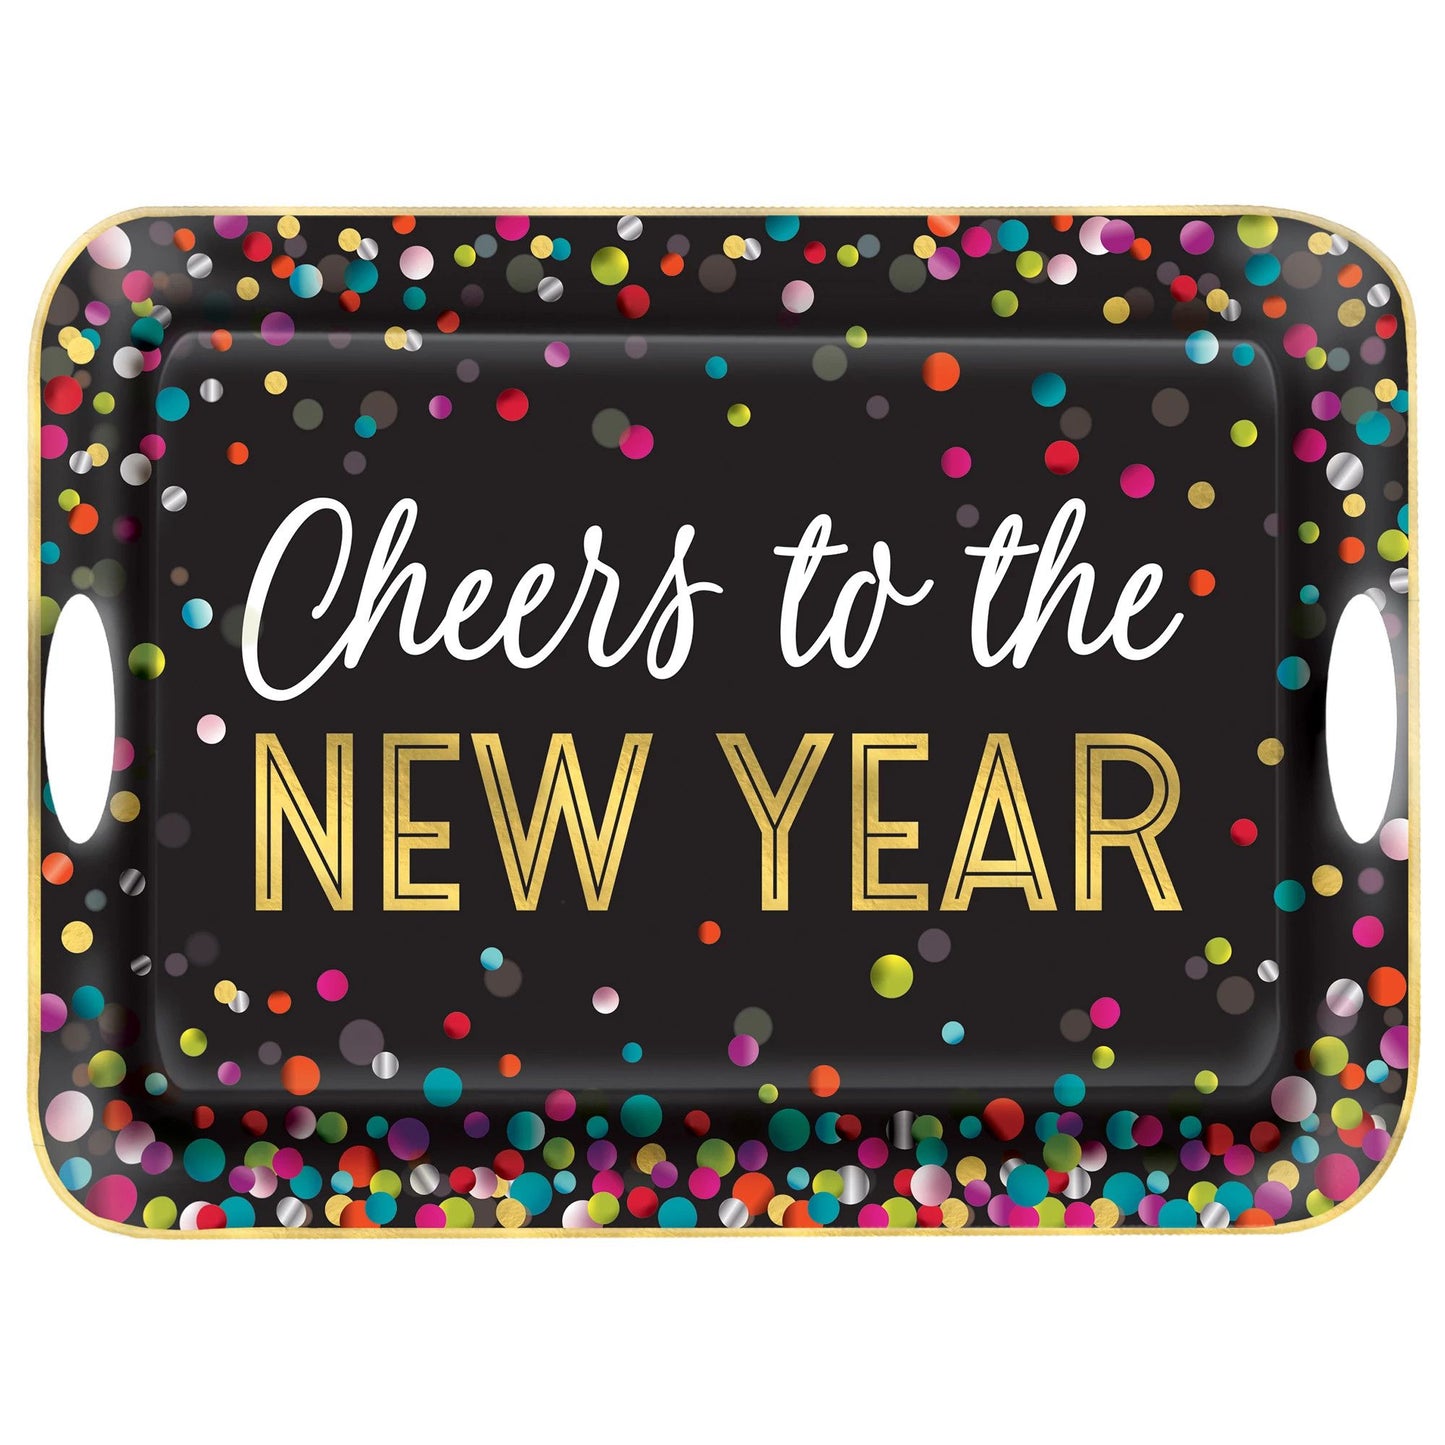 "Cheers to You" New Years Melamine Handle Tray